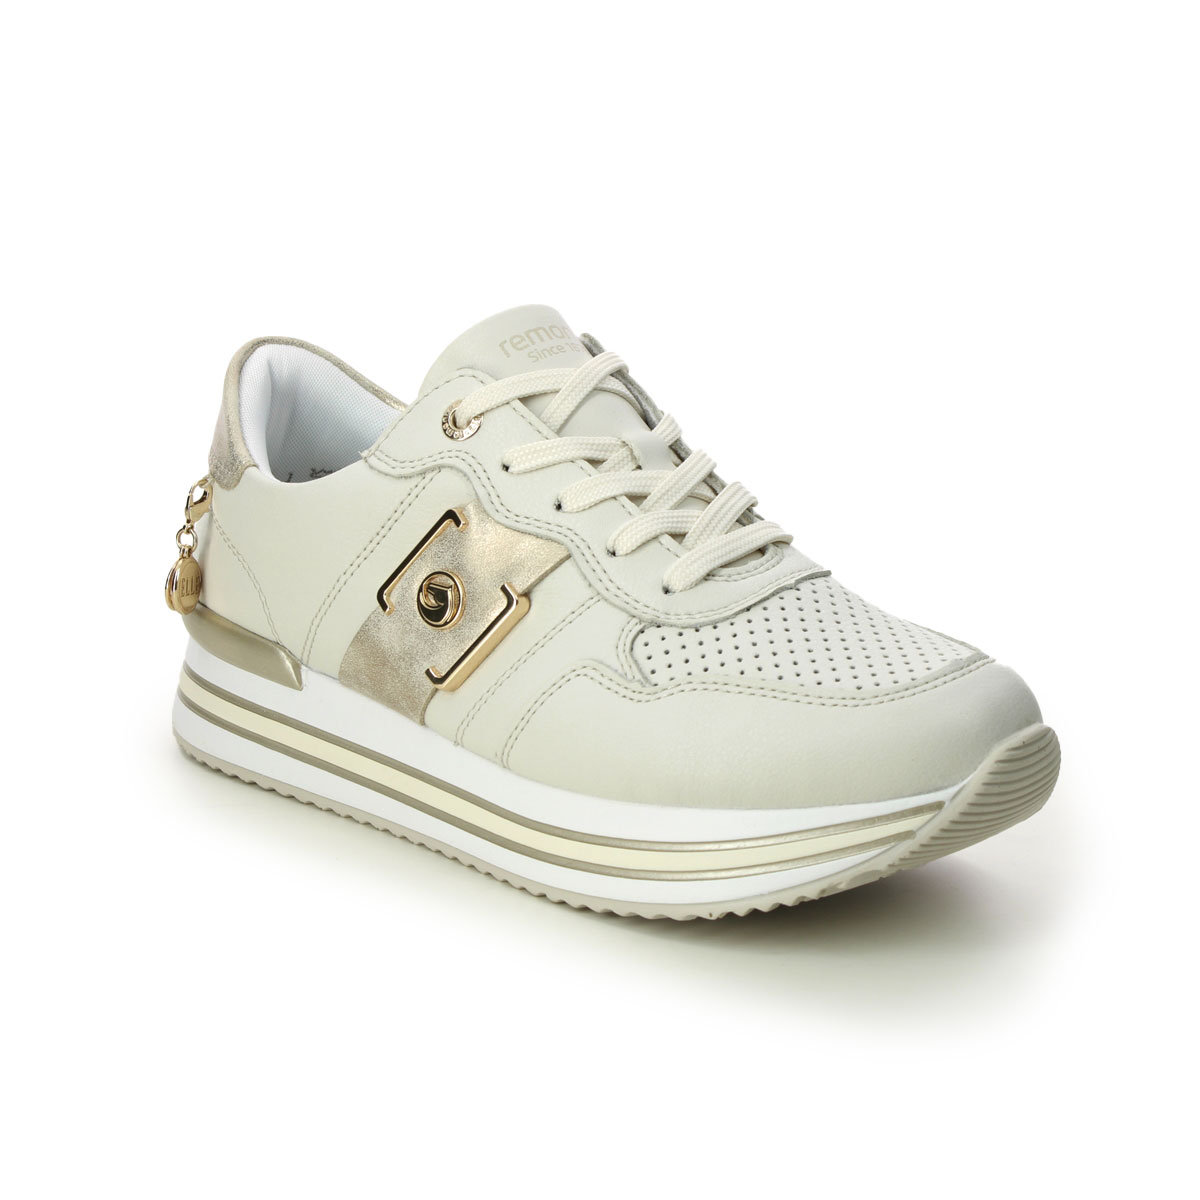 Remonte D1322-60 Ranger Elle Off White Womens trainers in a Plain Leather in Size 37